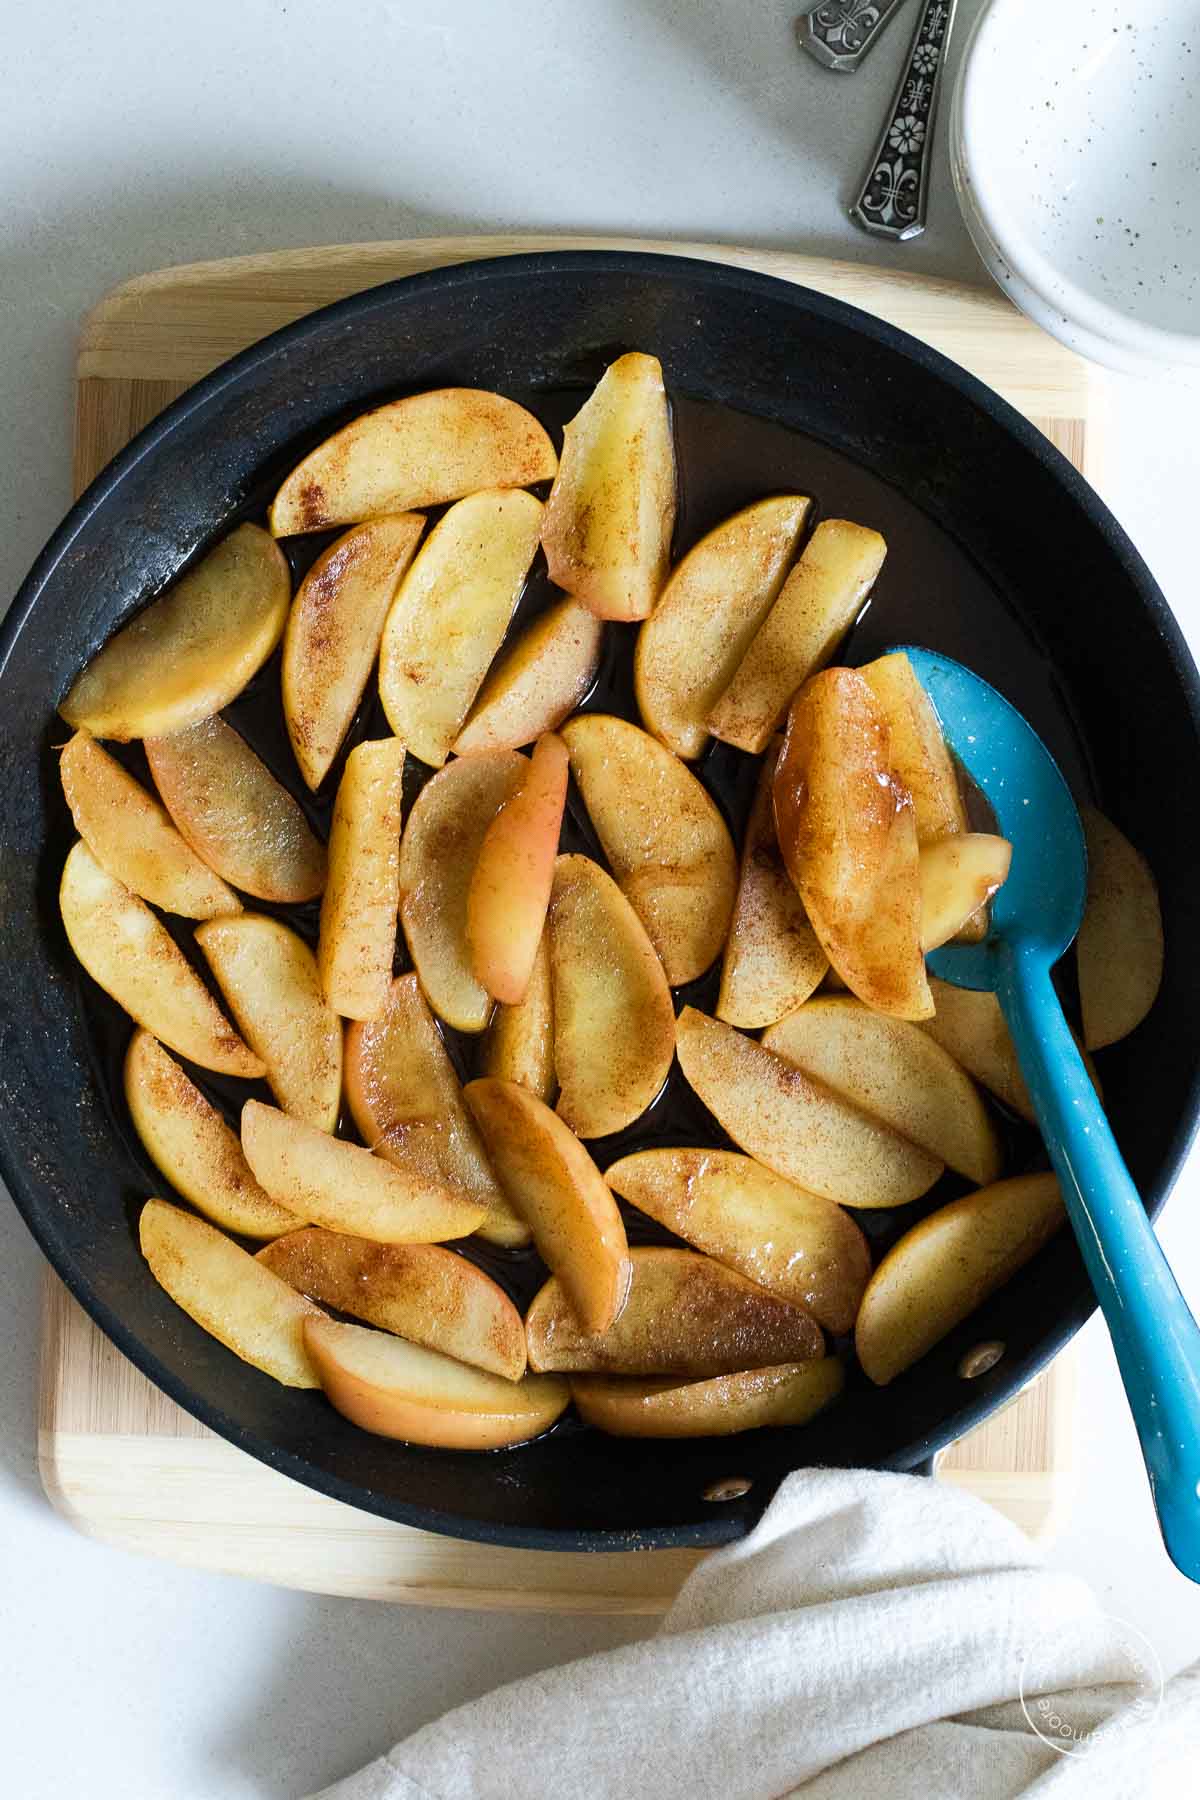 Apples in a skillet with a large blue spoon